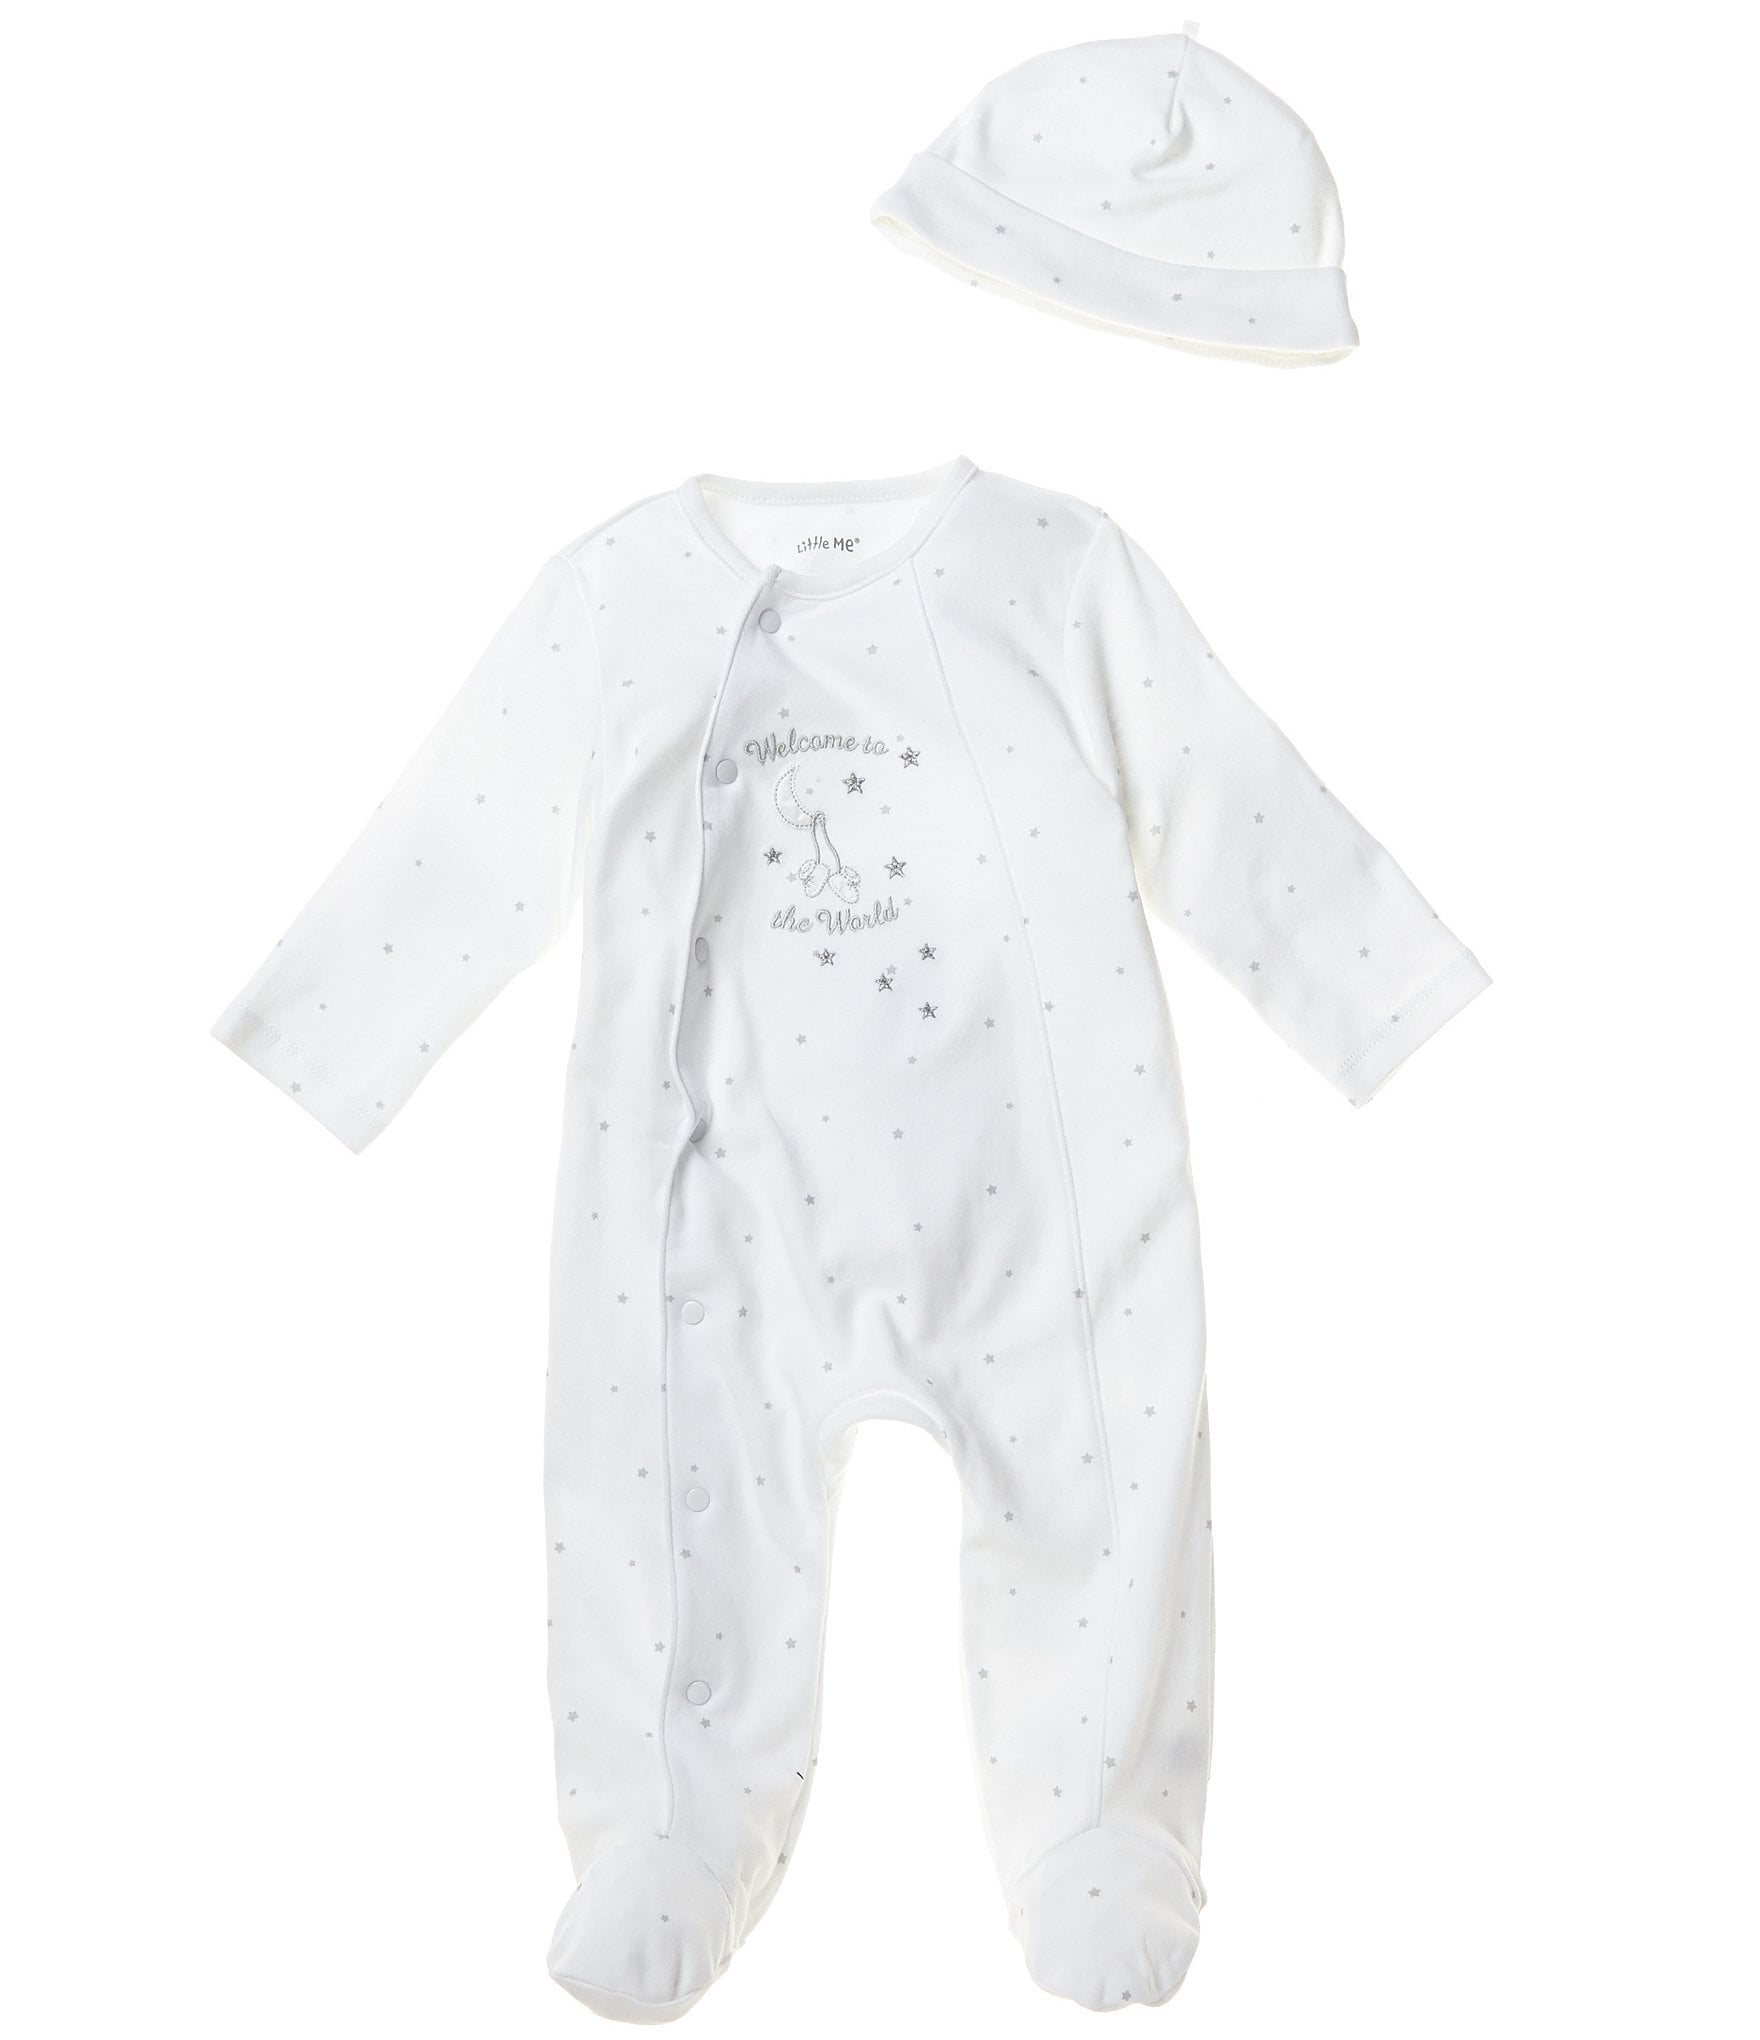 https://dimg.dillards.com/is/image/DillardsZoom/zoom/little-me-newborn-9-months-welcome-world-footed-coverall/04473131_zi_white.jpg